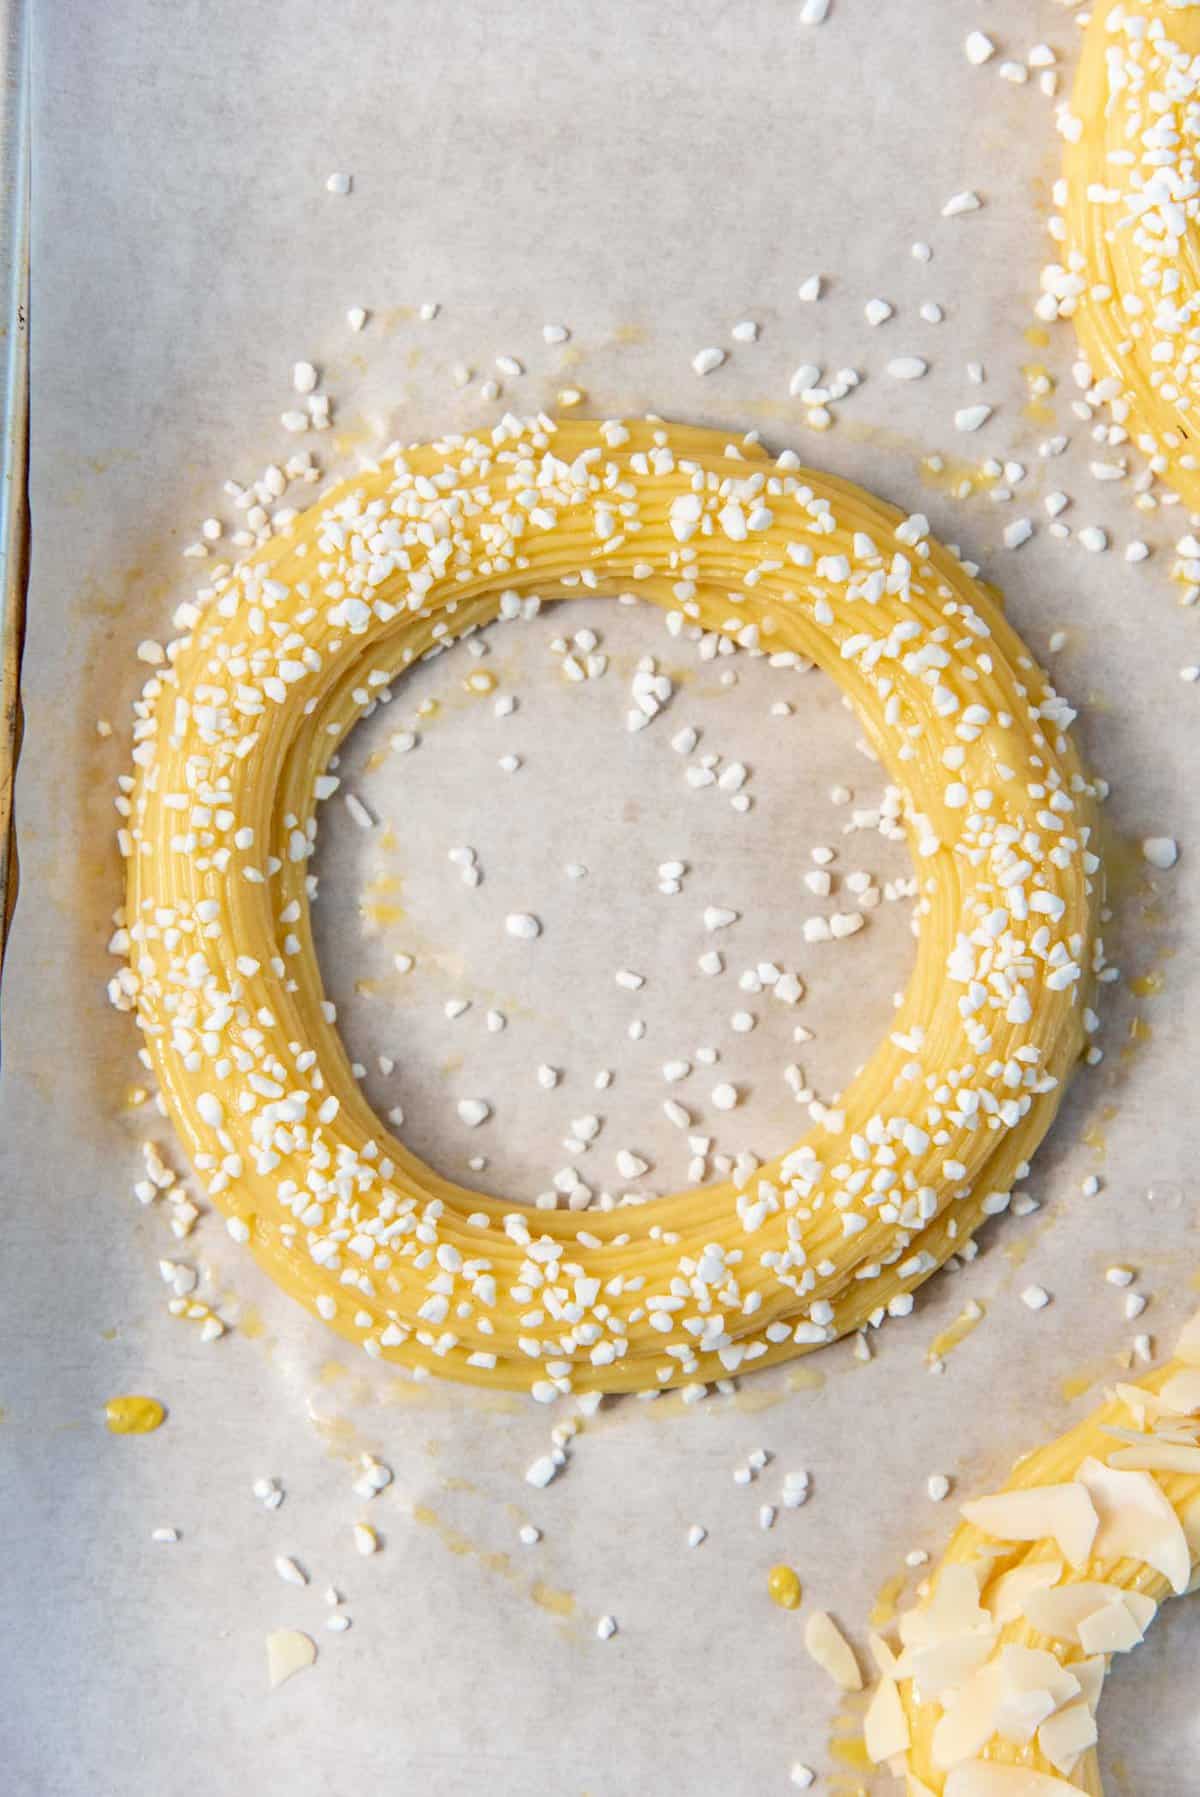 Small pearl sugar pieces sprinkled over the egg washes choux pastry rings.